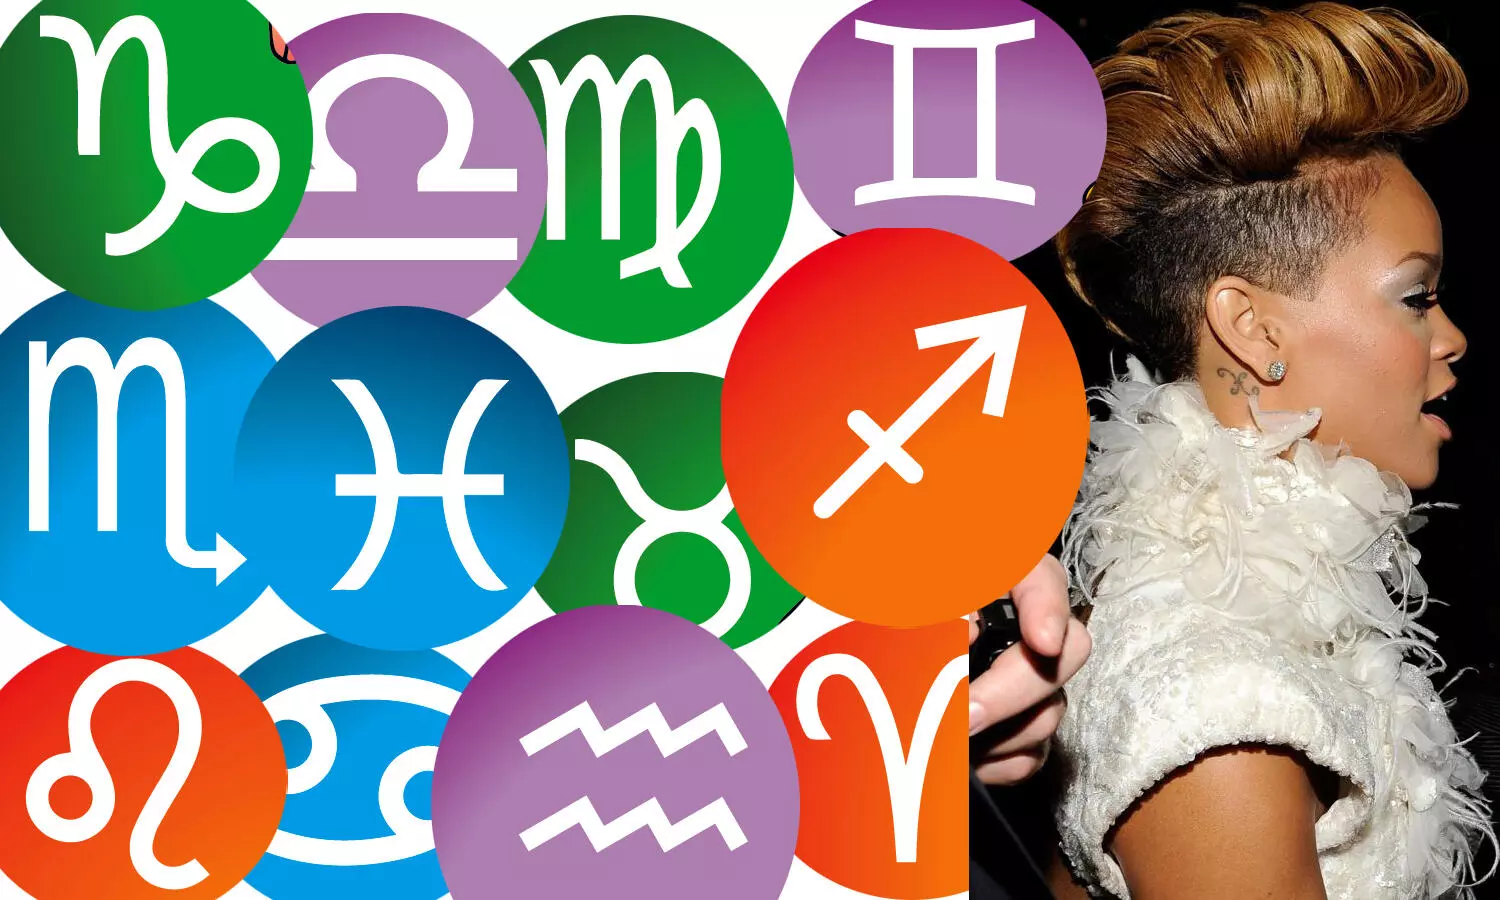 13 Celebrity Zodiac Signs With List Of Famous People 2022